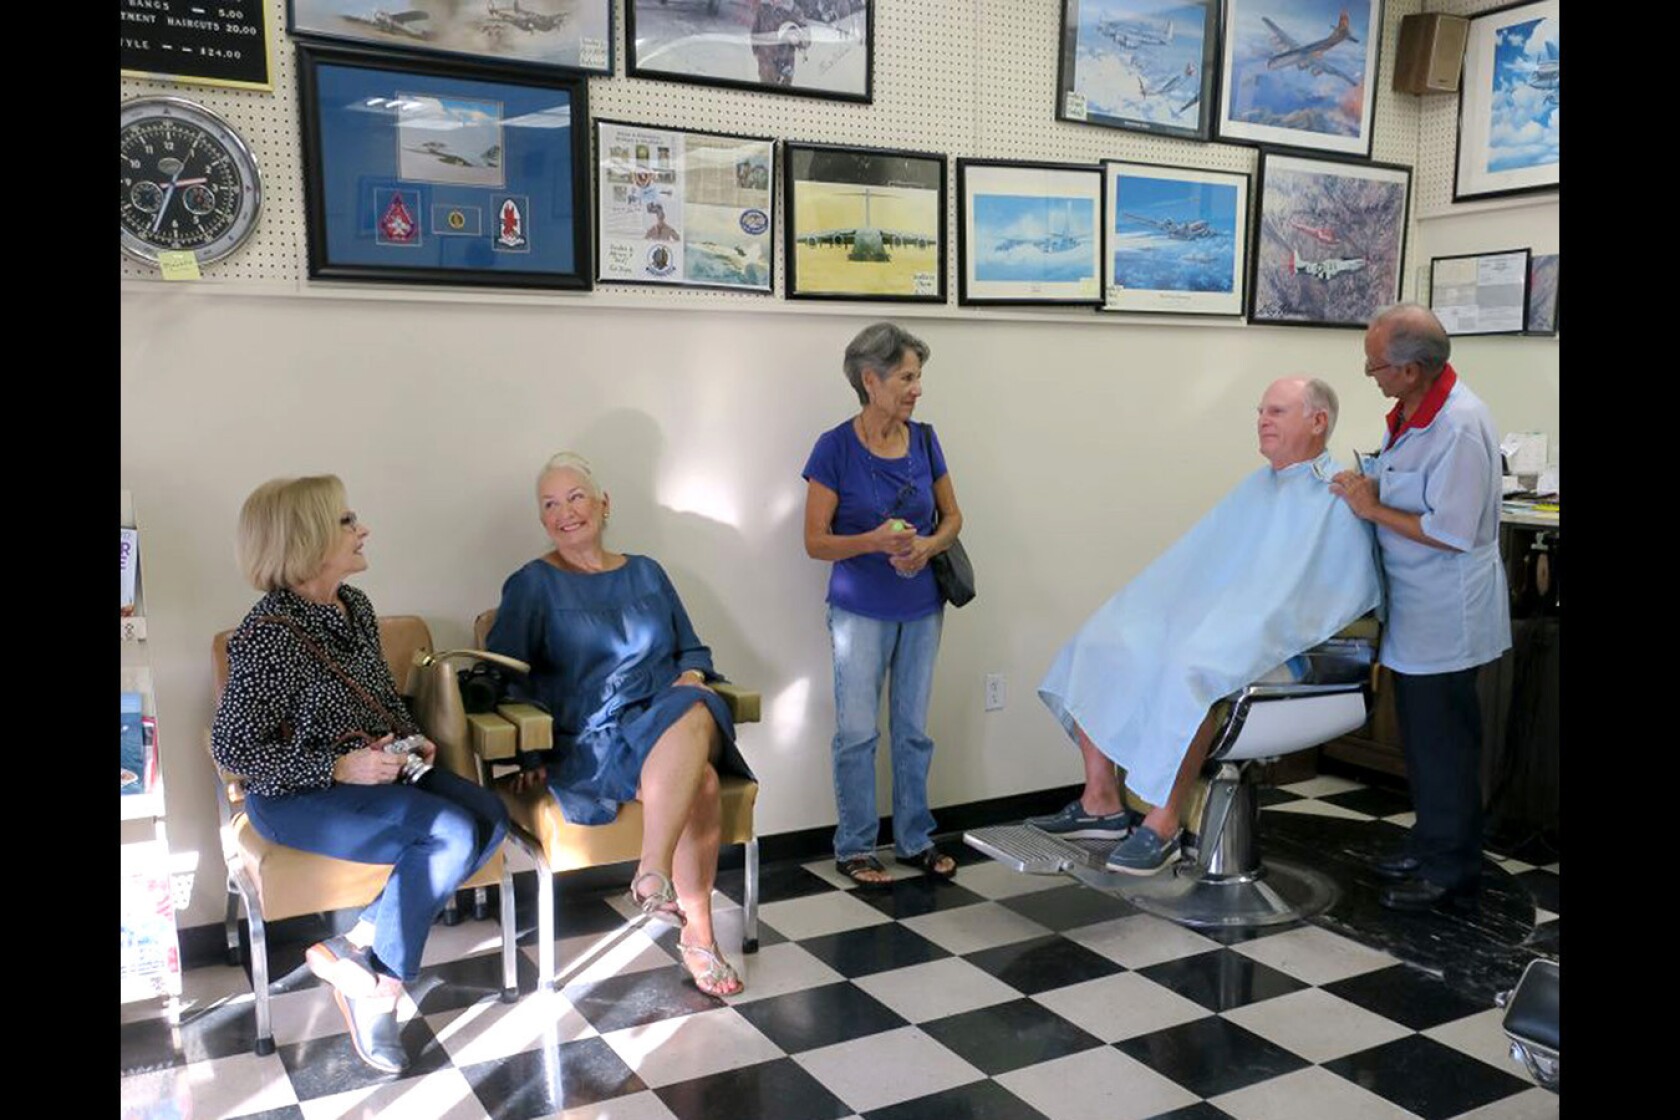 Paco S Barber Shop Closes For Business After 57 Years Of